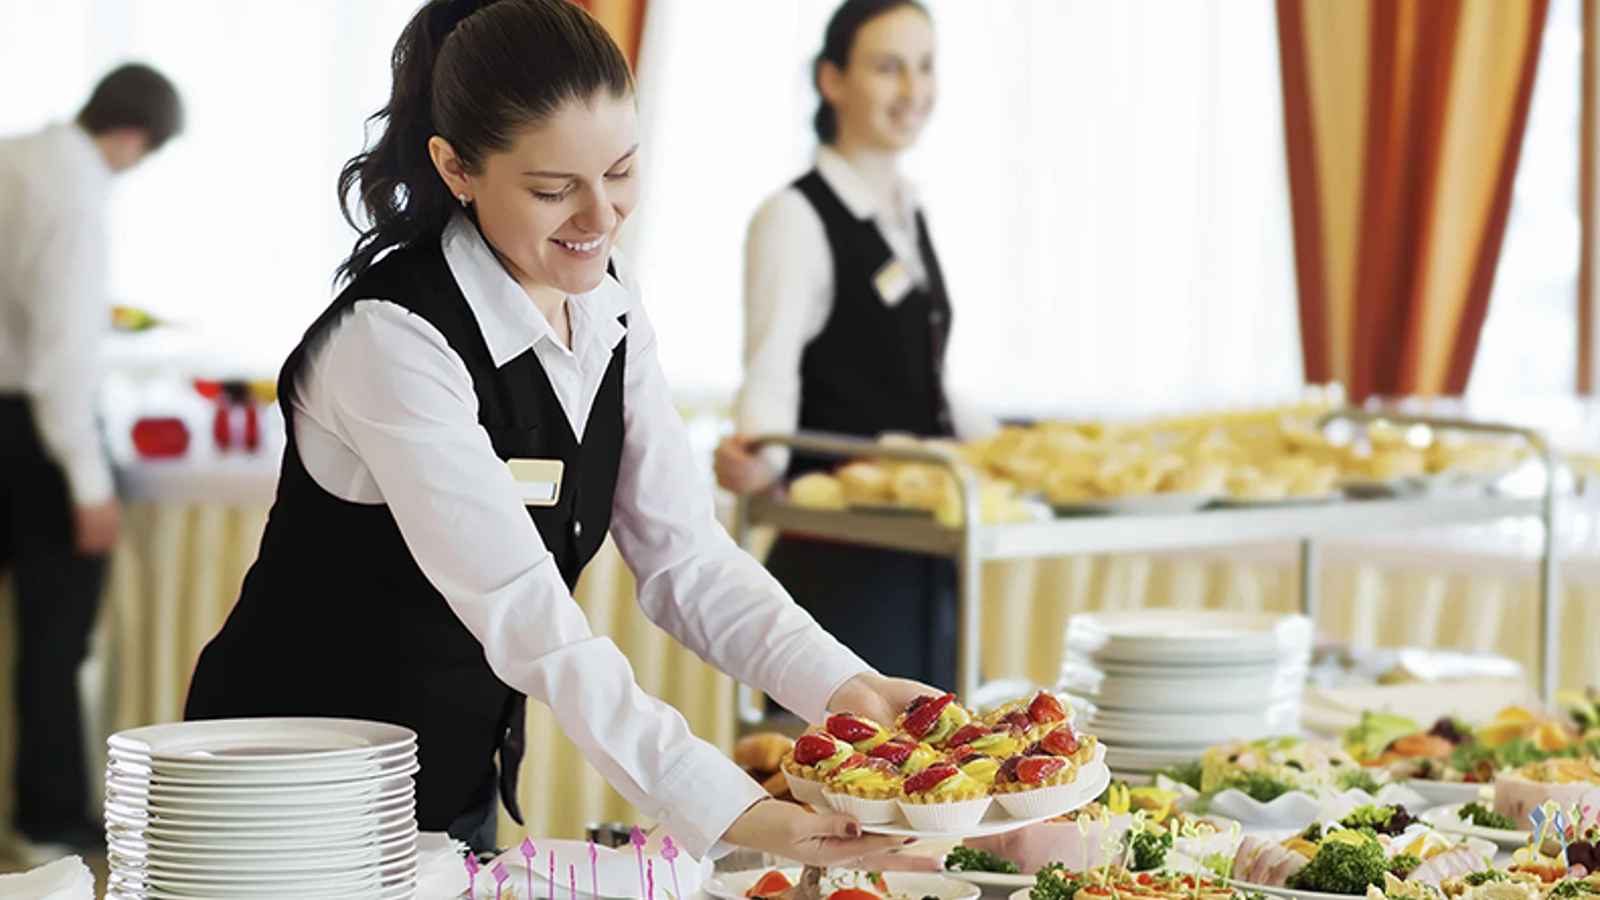 National Caterers Appreciation Day 2023: Date, History, Facts about Catering Worth Knowing